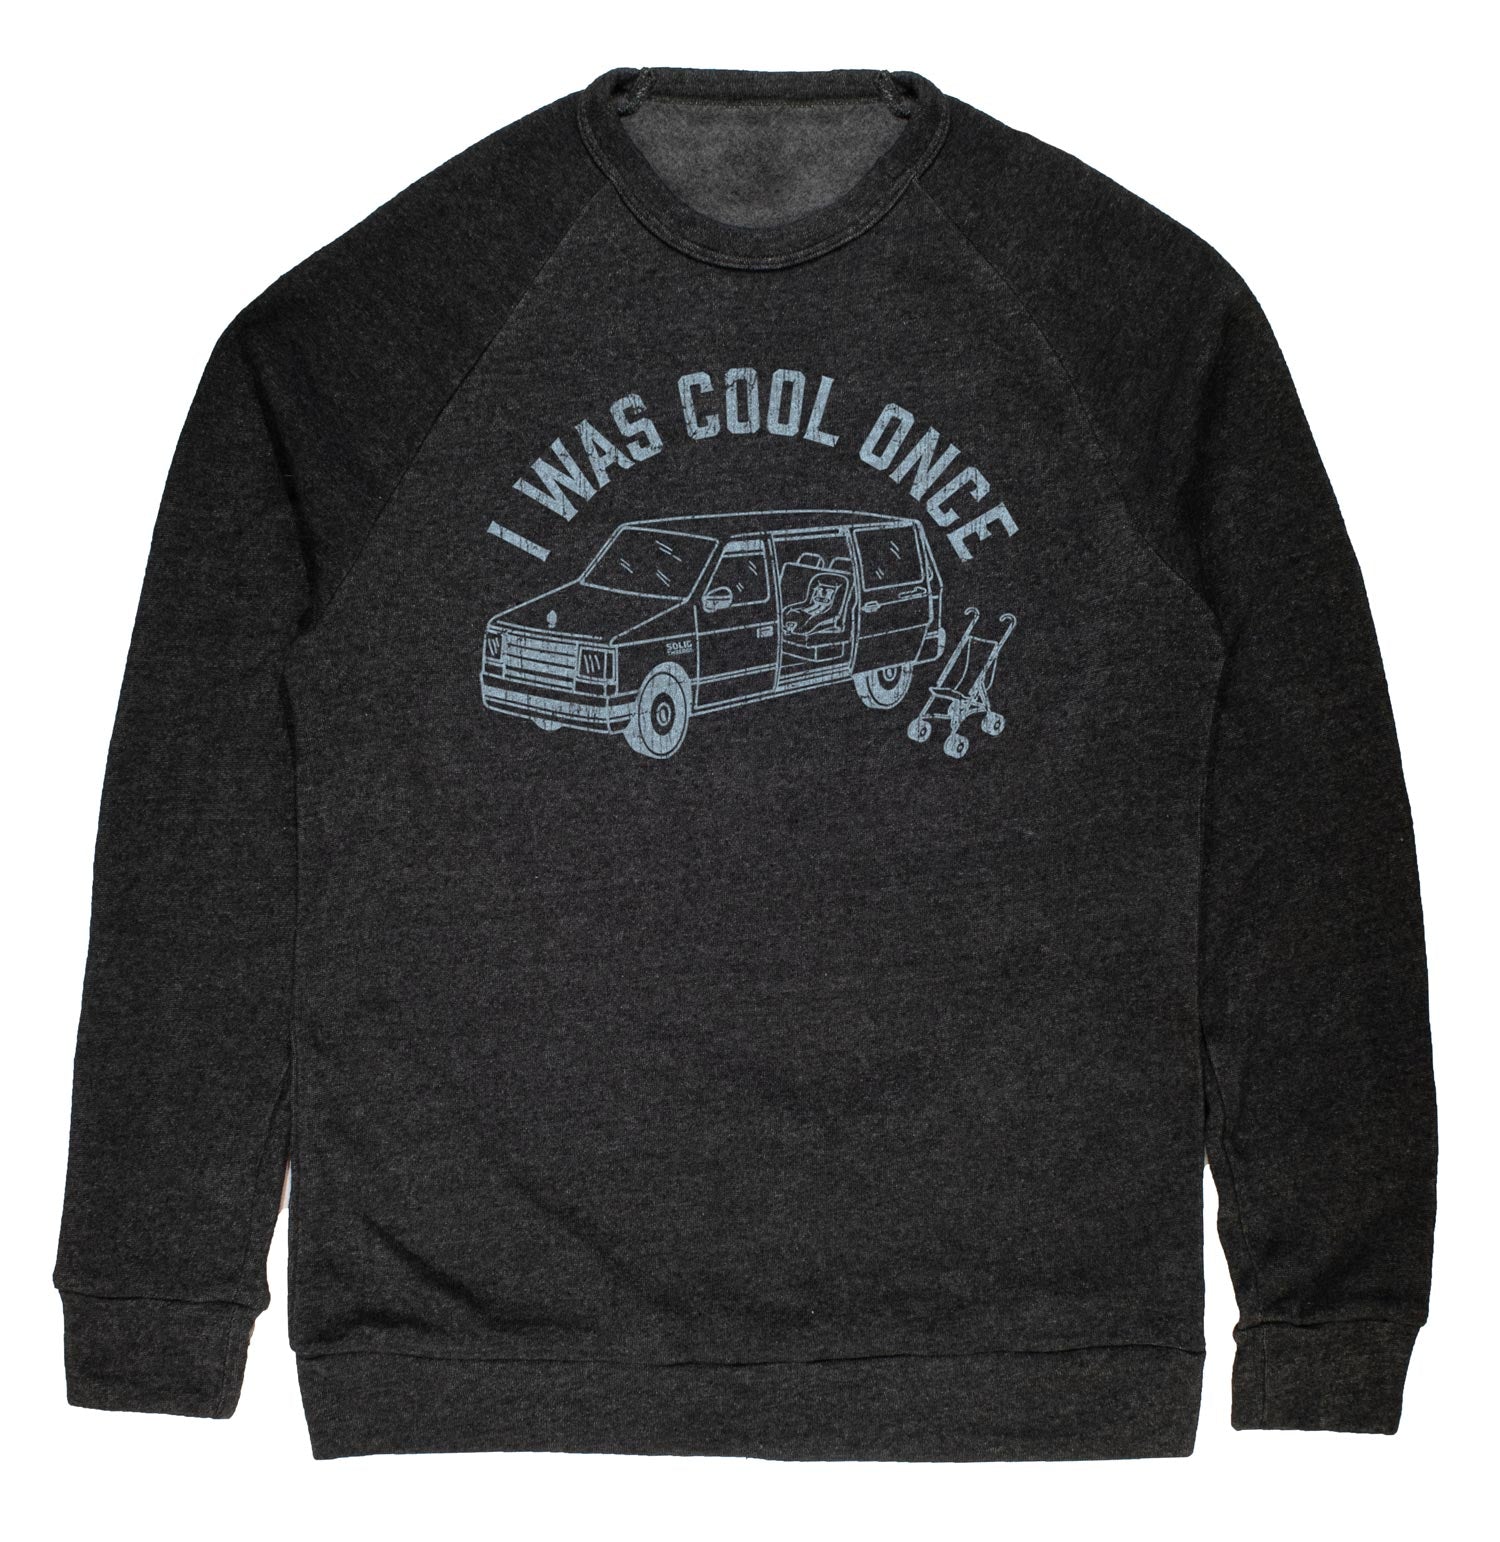 Used To Be Cool Vintage Fleece Crewneck Sweatshirt | Funny Parenting Graphic | Solid Threads